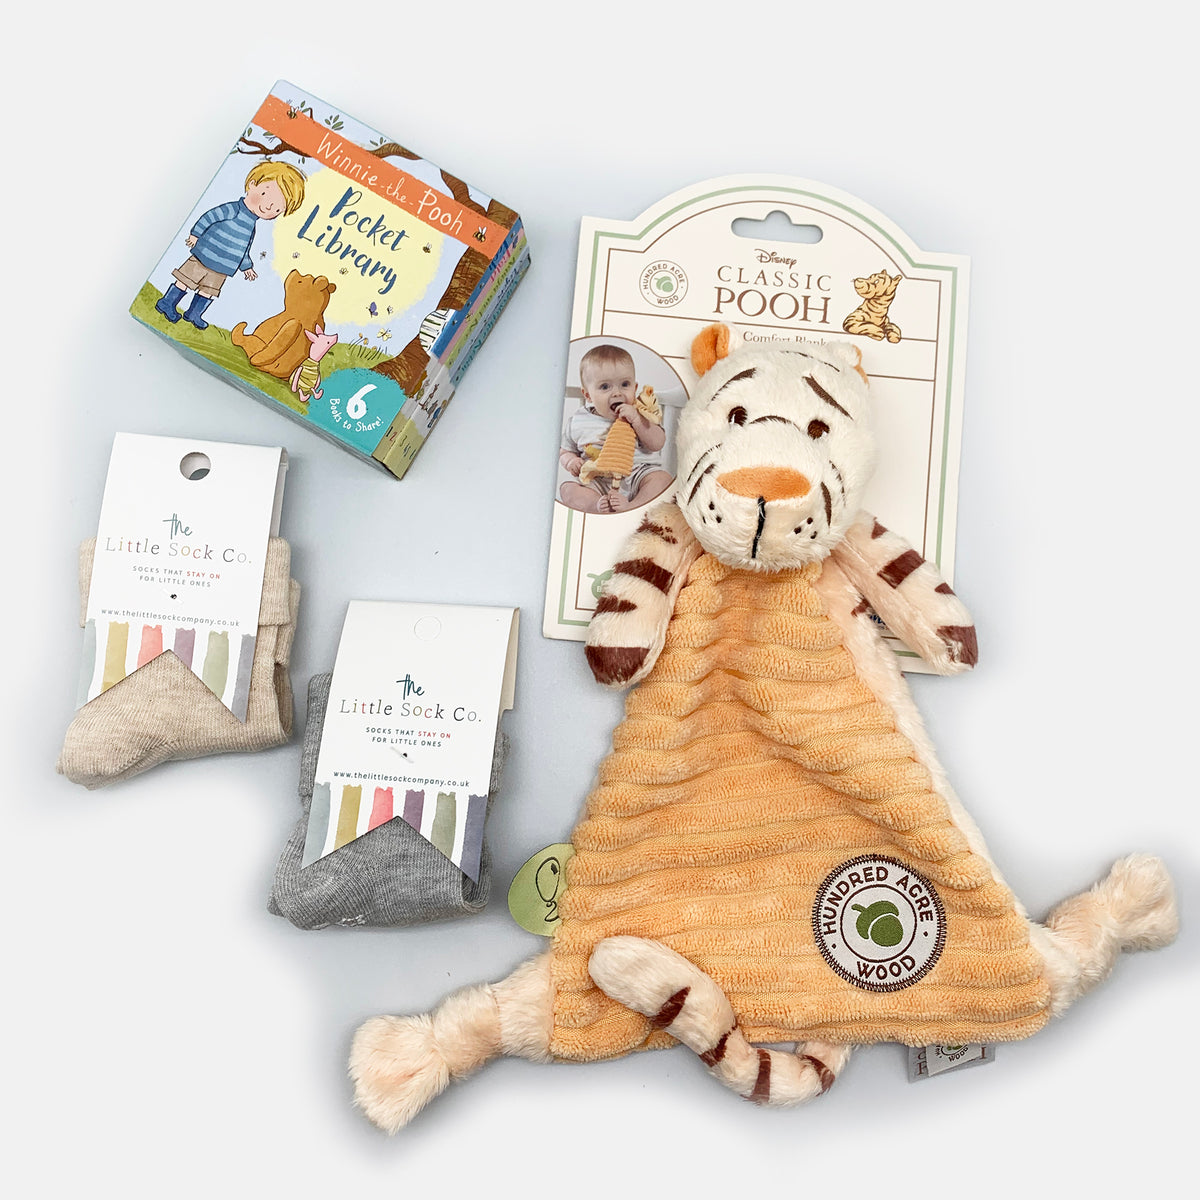 Tigger Comforter and Book Newborn and Baby Gift Set